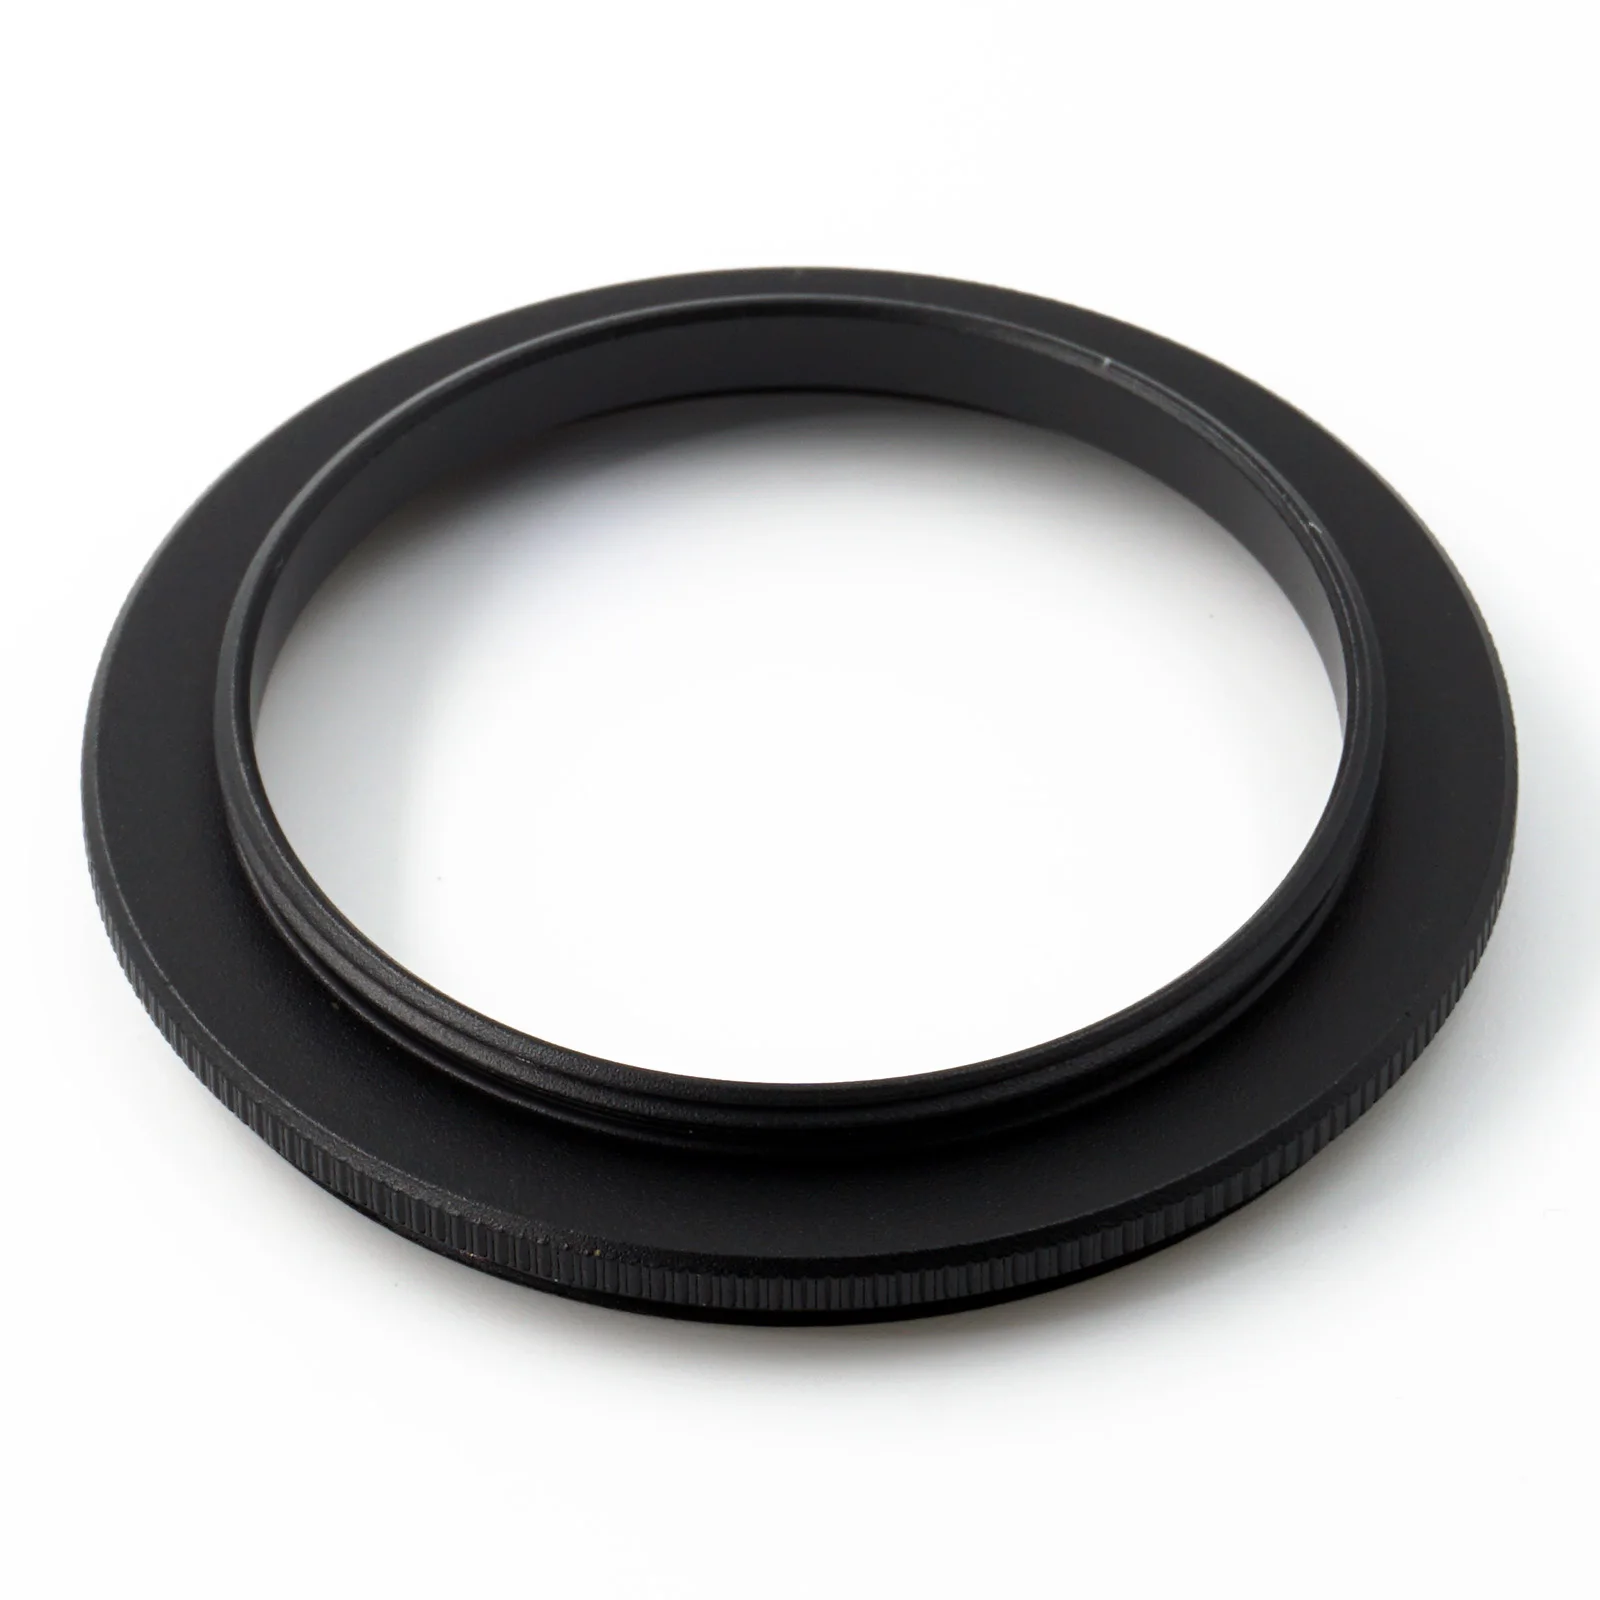 42-49 Male to Male 42mm x0.75 - 49mm x0.75 Double Outer Thread Lens Adapter Ring